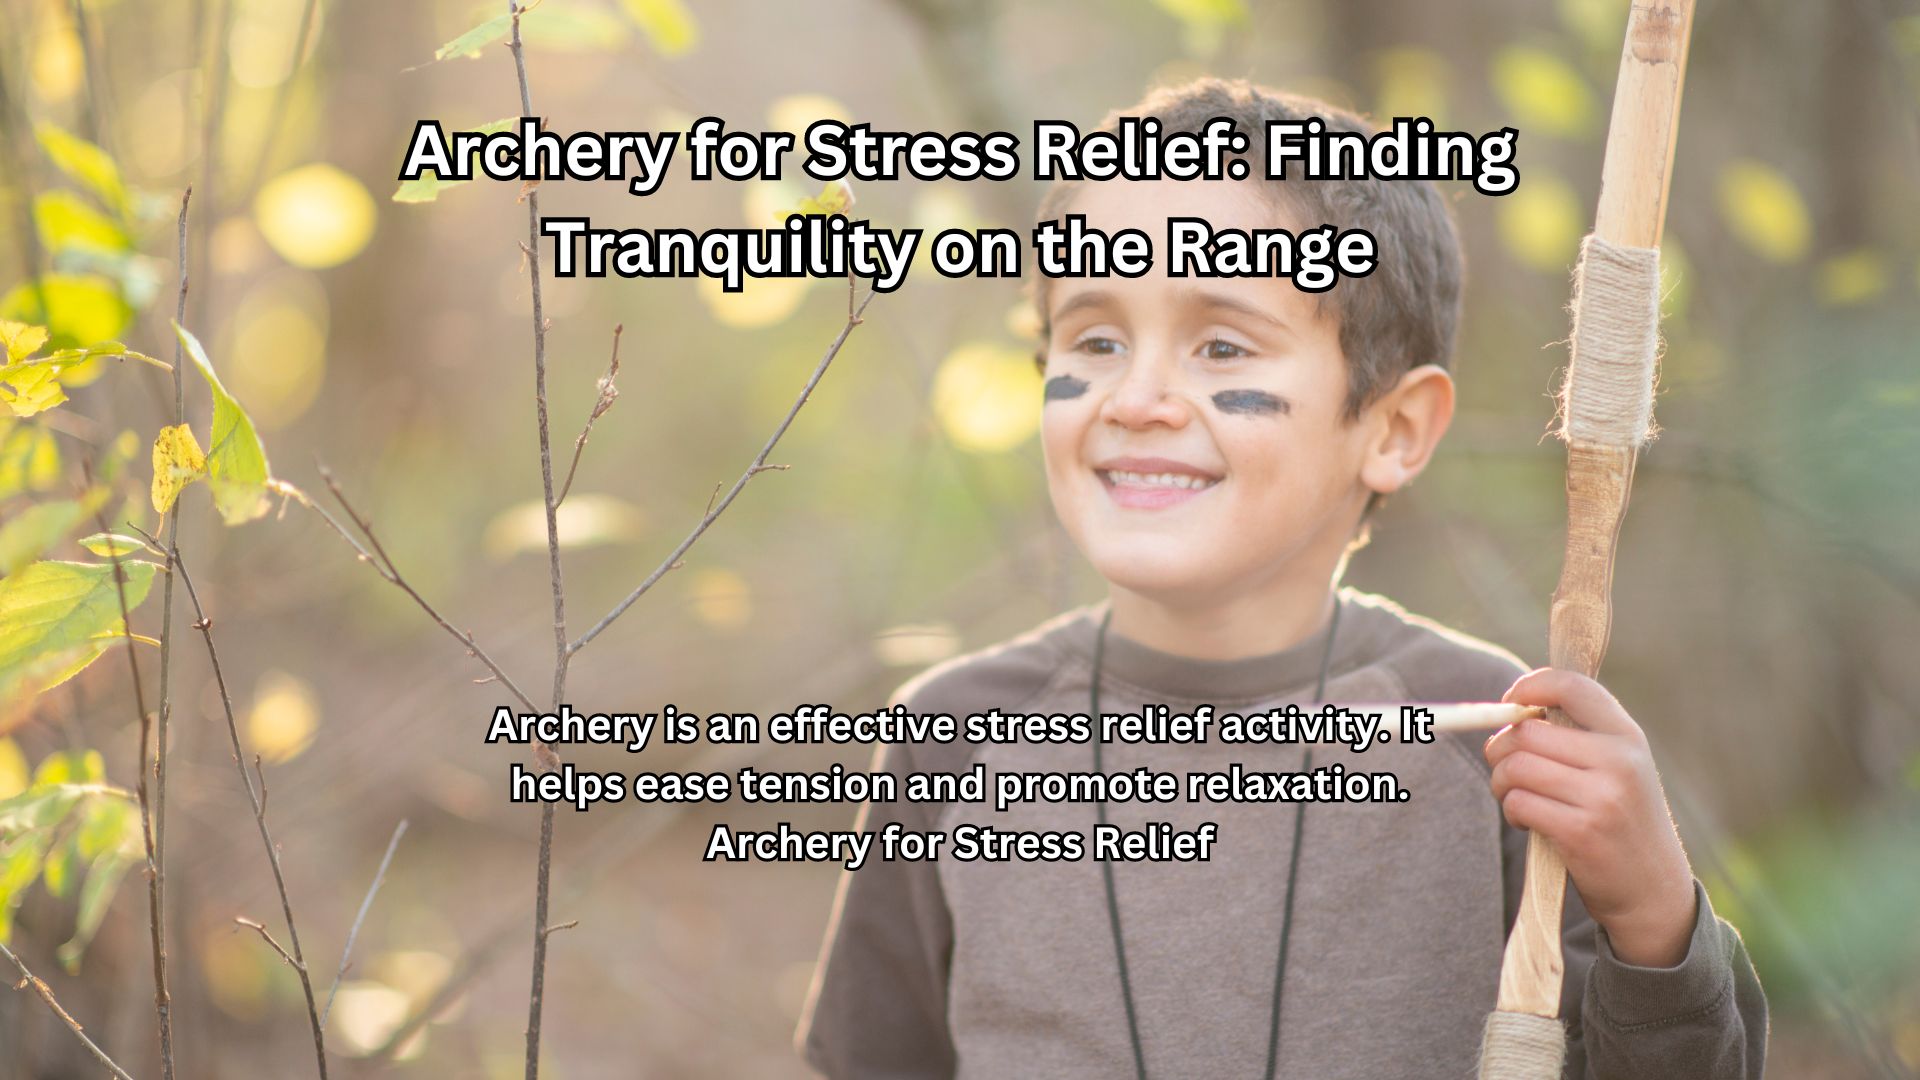 Archery for Stress Relief